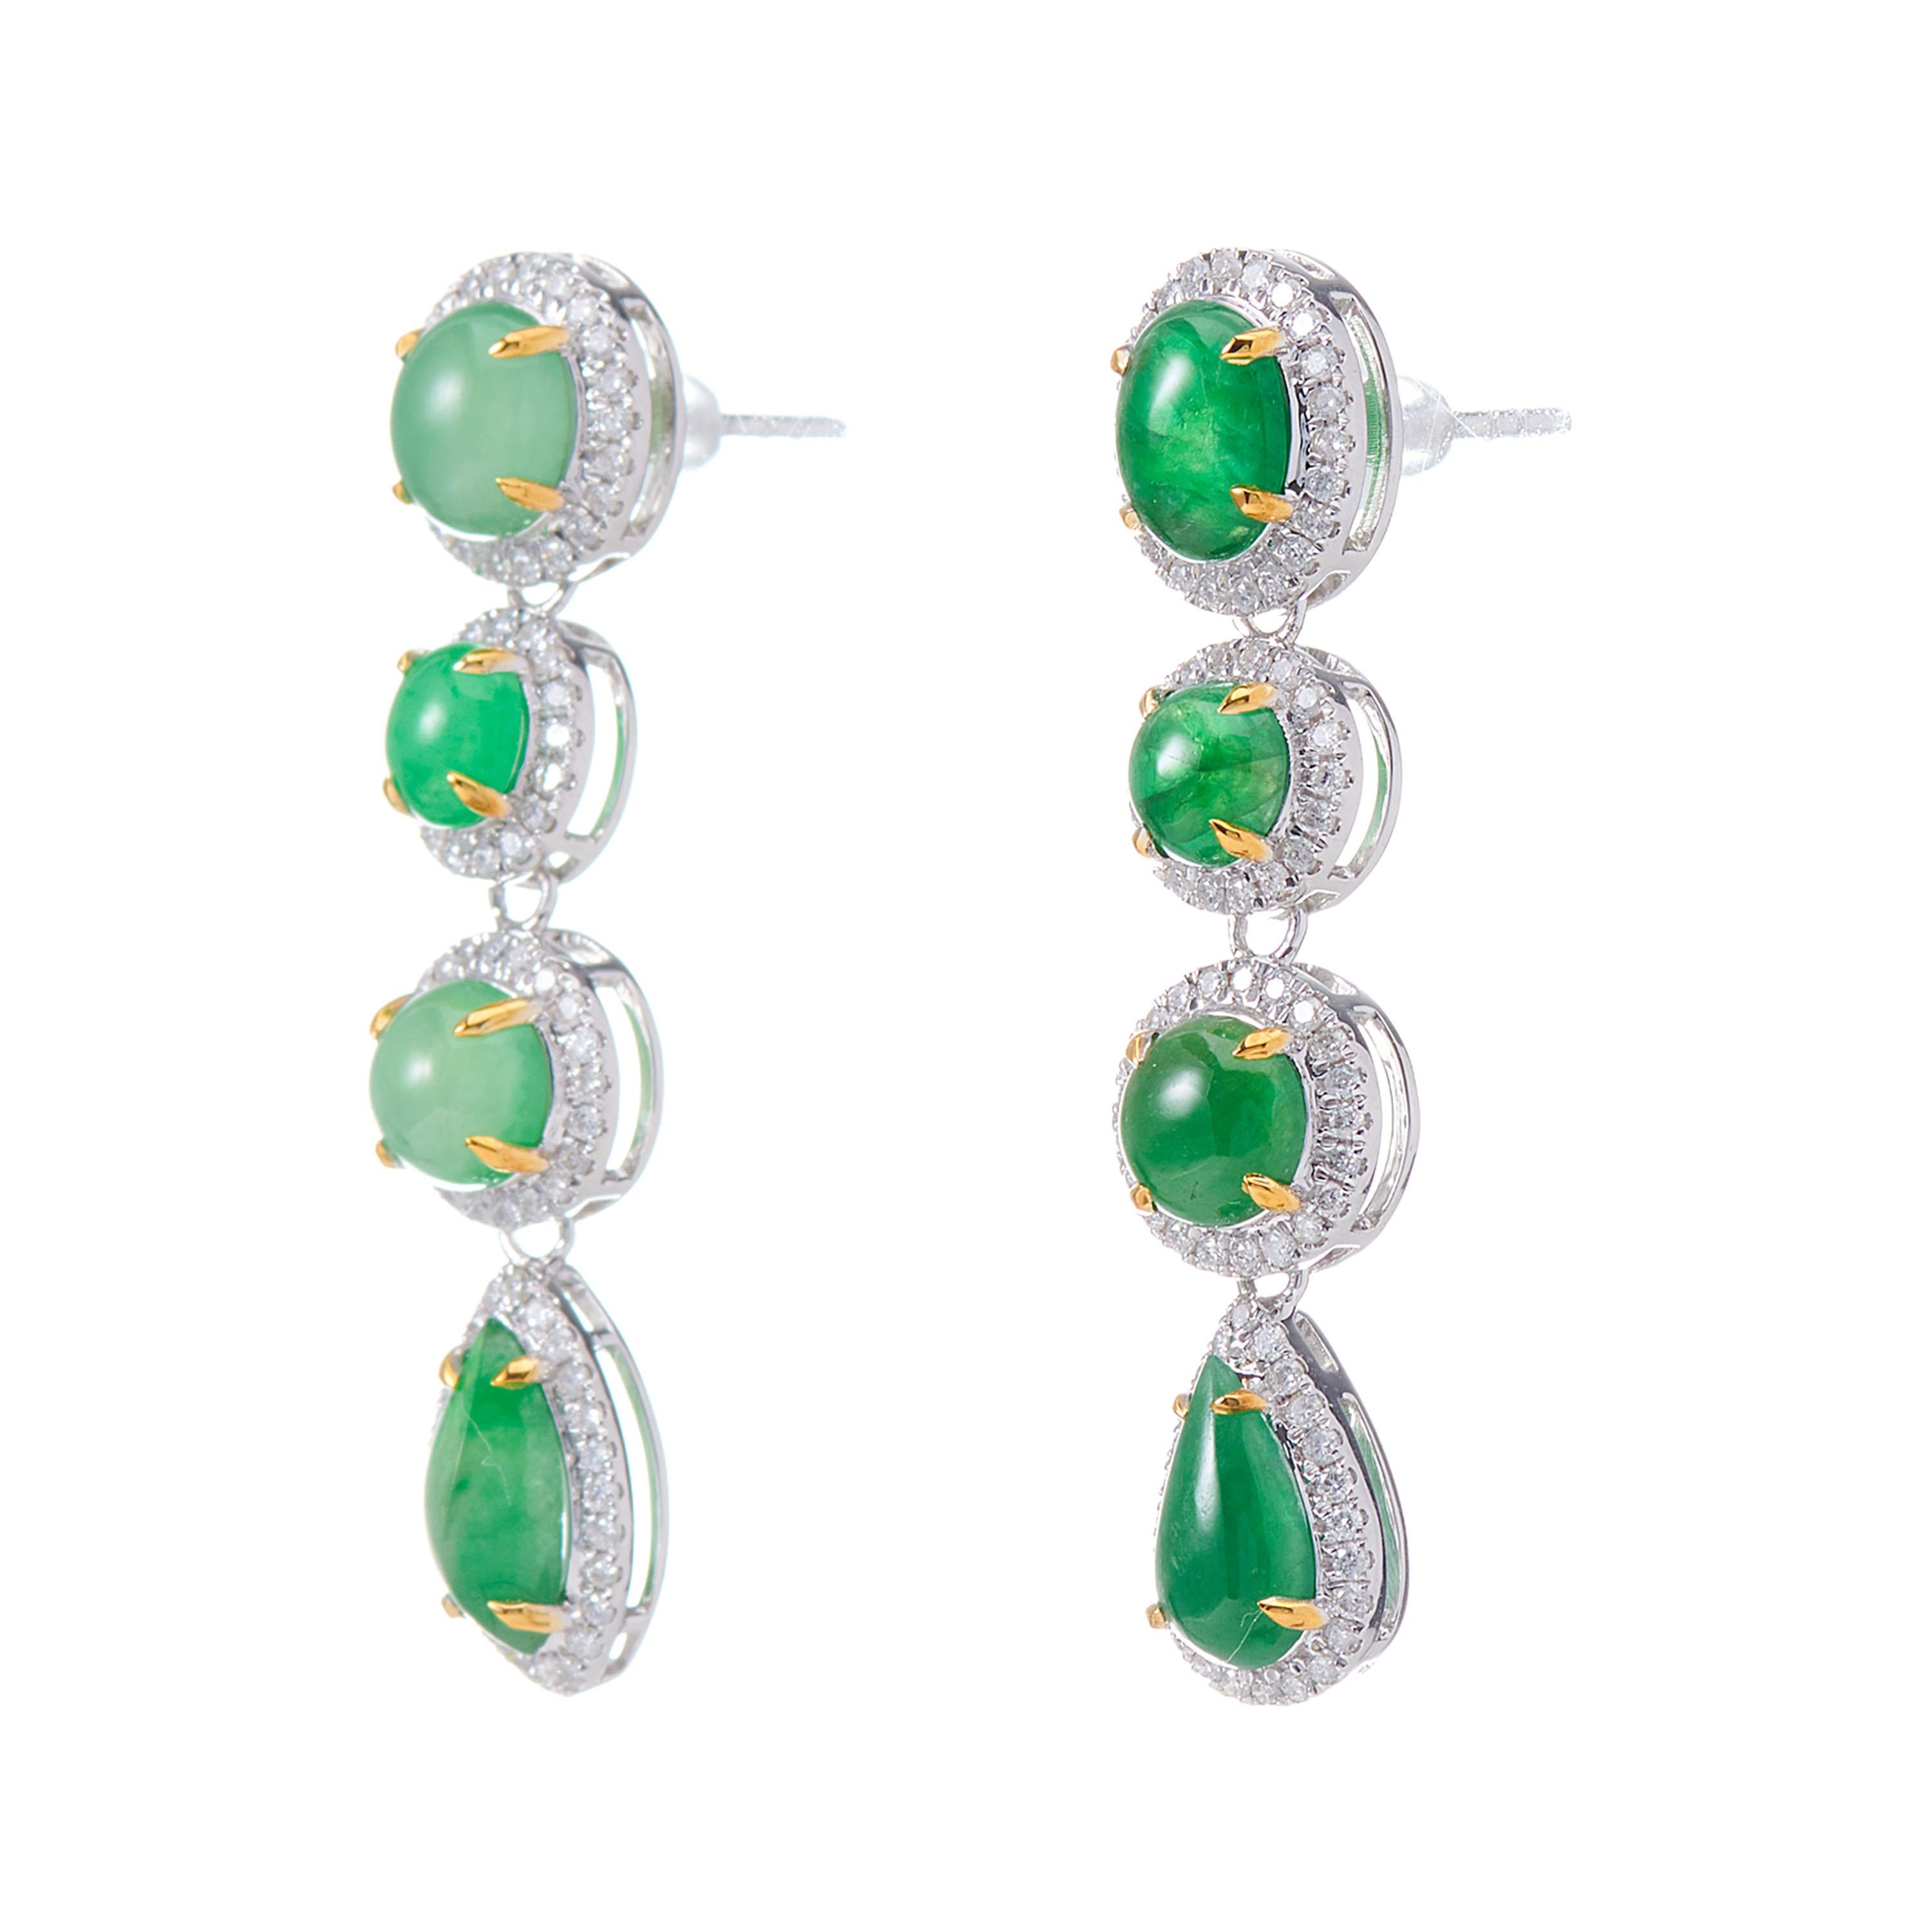 Description:
The beauty of asymmetry and individualism is capture in these Fei Liu one-of-a-kind drop earrings. Each earring features a delectable assortment of imperial jade, showcasing the array of light and dark green hues seen in natural jade.